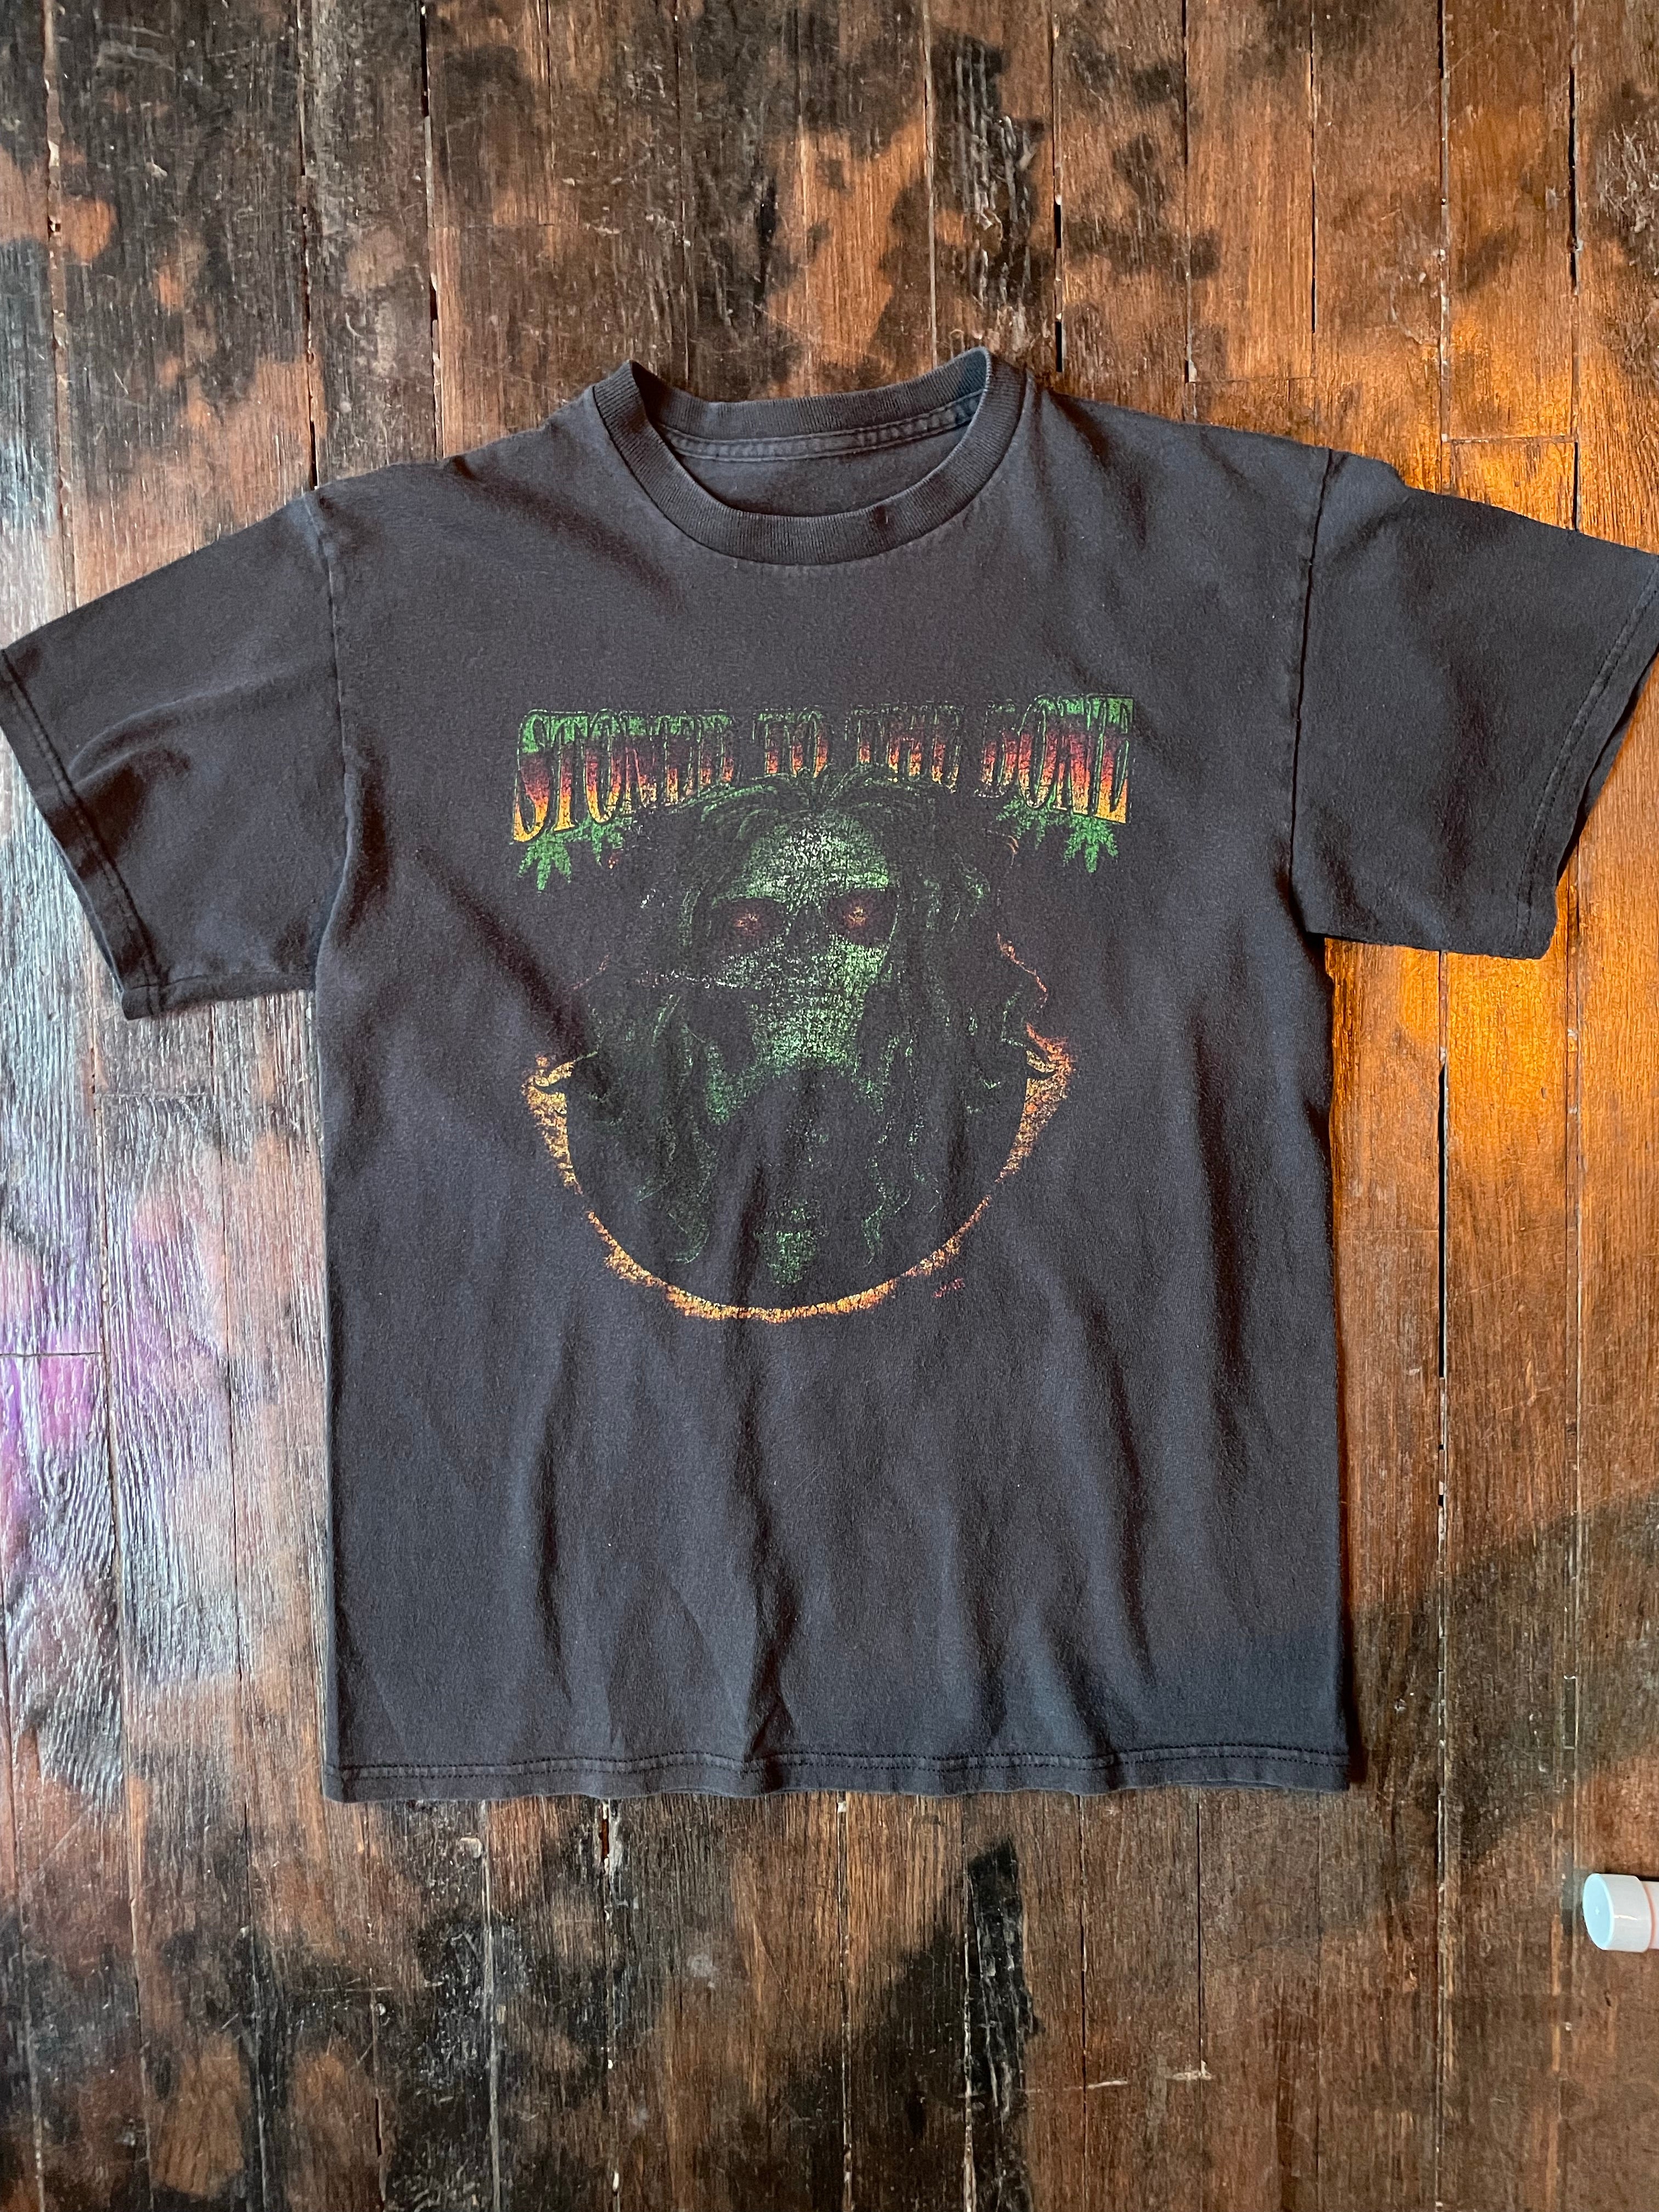 Vintage Stoned to The Bone T-shirt